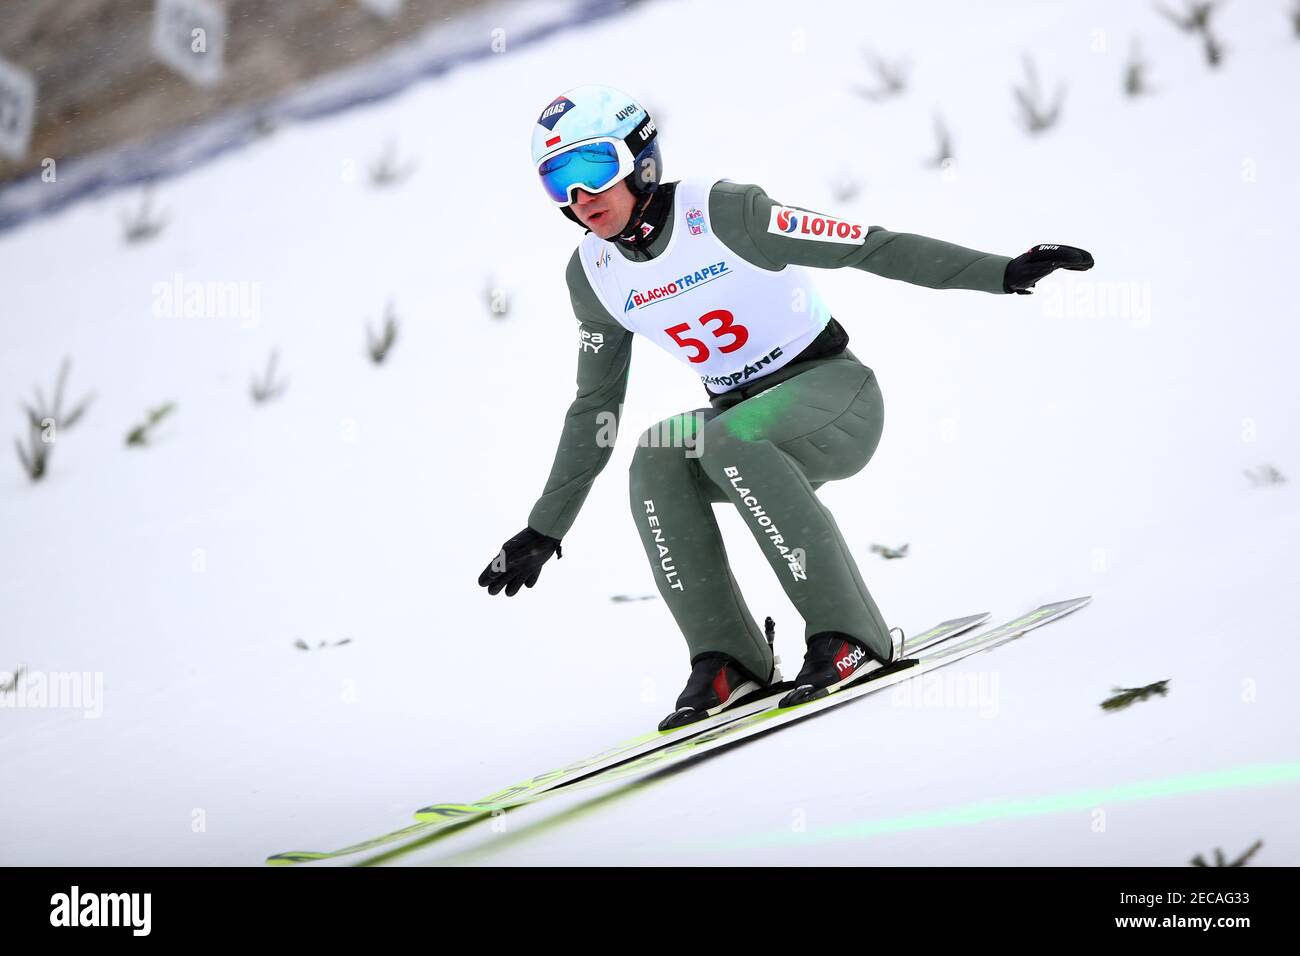 Zakopane, Poland. 13th Feb, 2021. Kamil Stoch ski jumping on The Great Krokiew Ski Jumping facility during the Ski Jumping World Cup competition in Zakopane. Credit: SOPA Images Limited/Alamy Live News Stock Photo